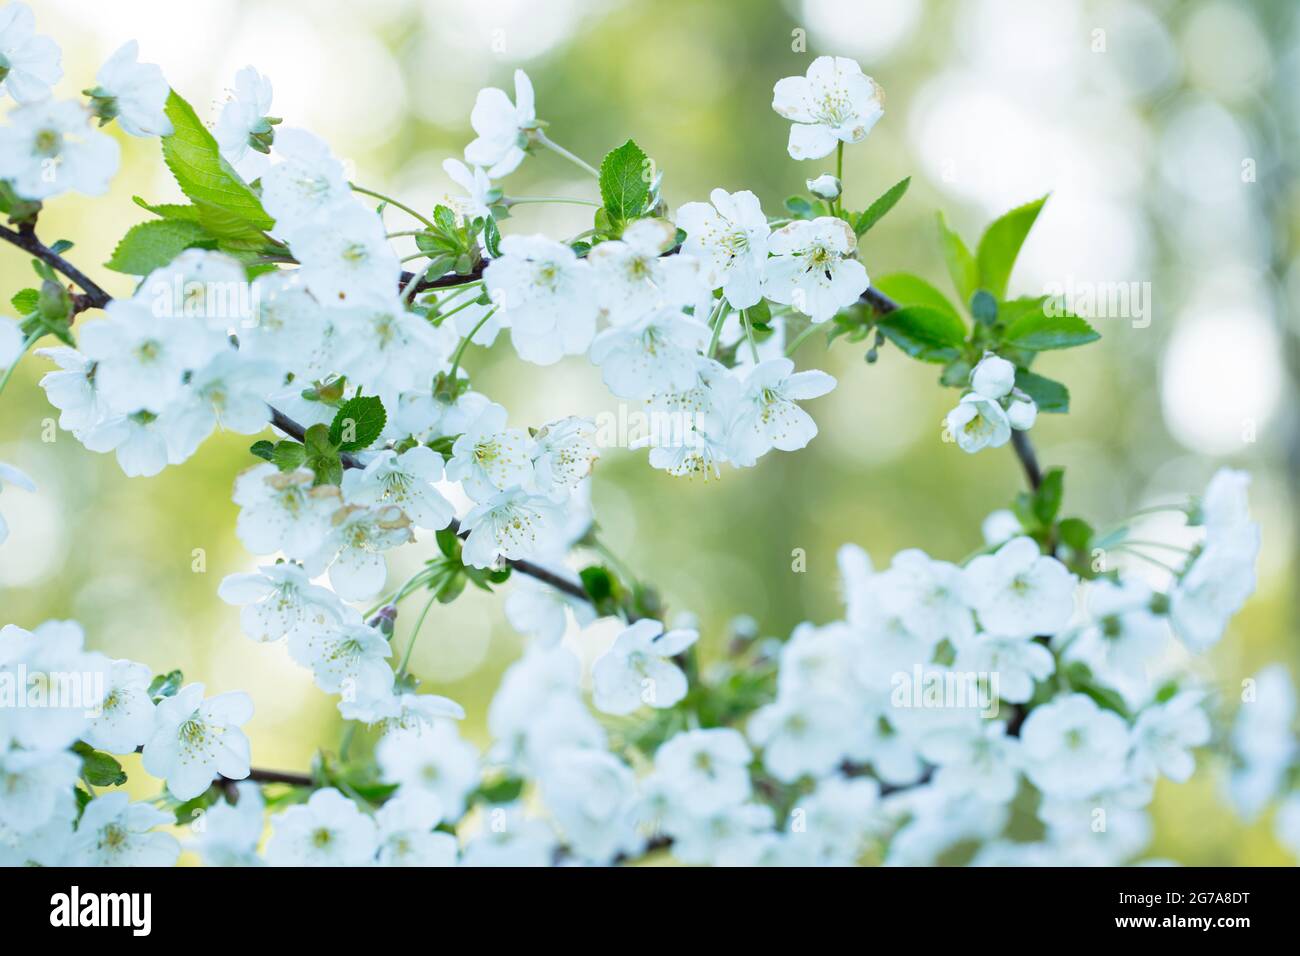 Cherry tree branches with white flowers, blurred natural background Stock Photo